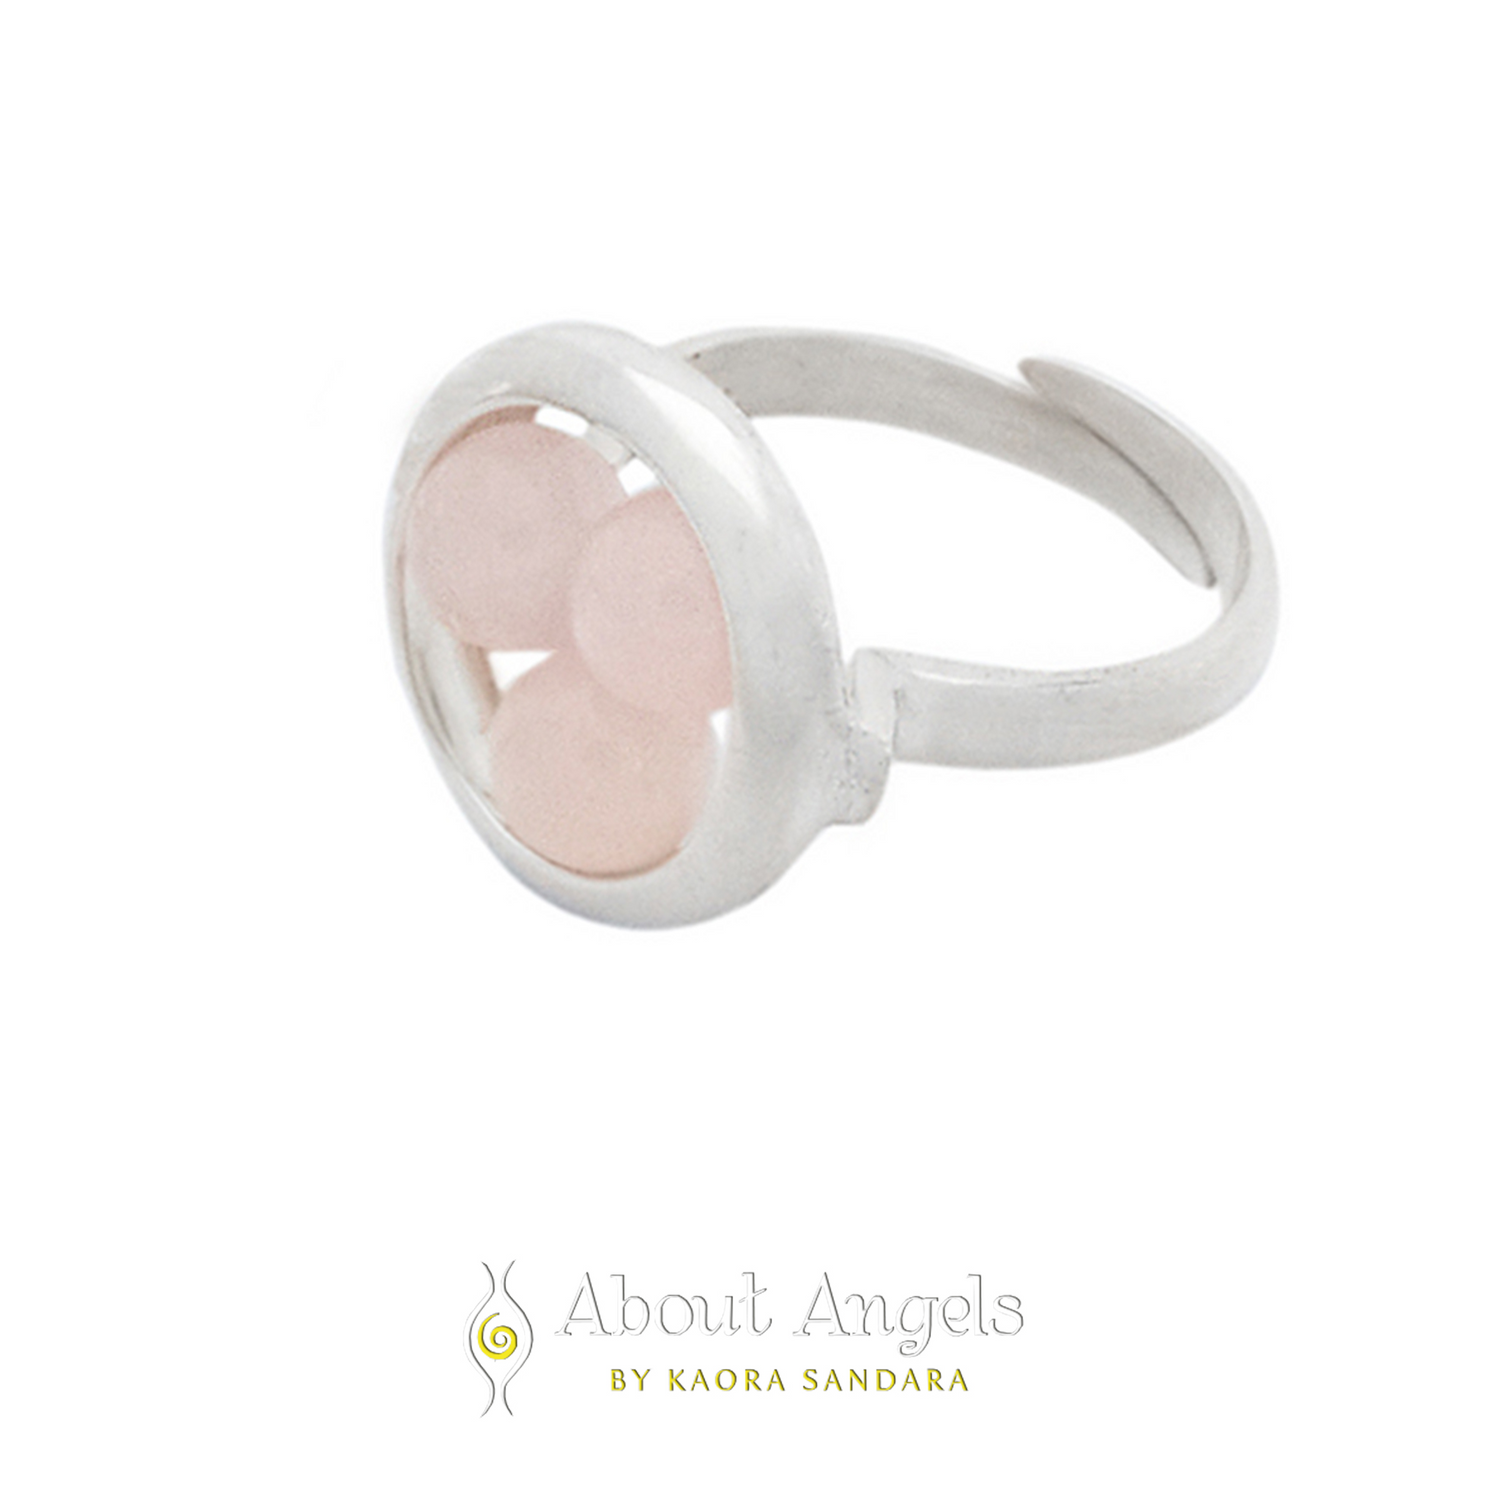 Buy the perfect sparkling Ring Crystal Peace Rose Quartz today!